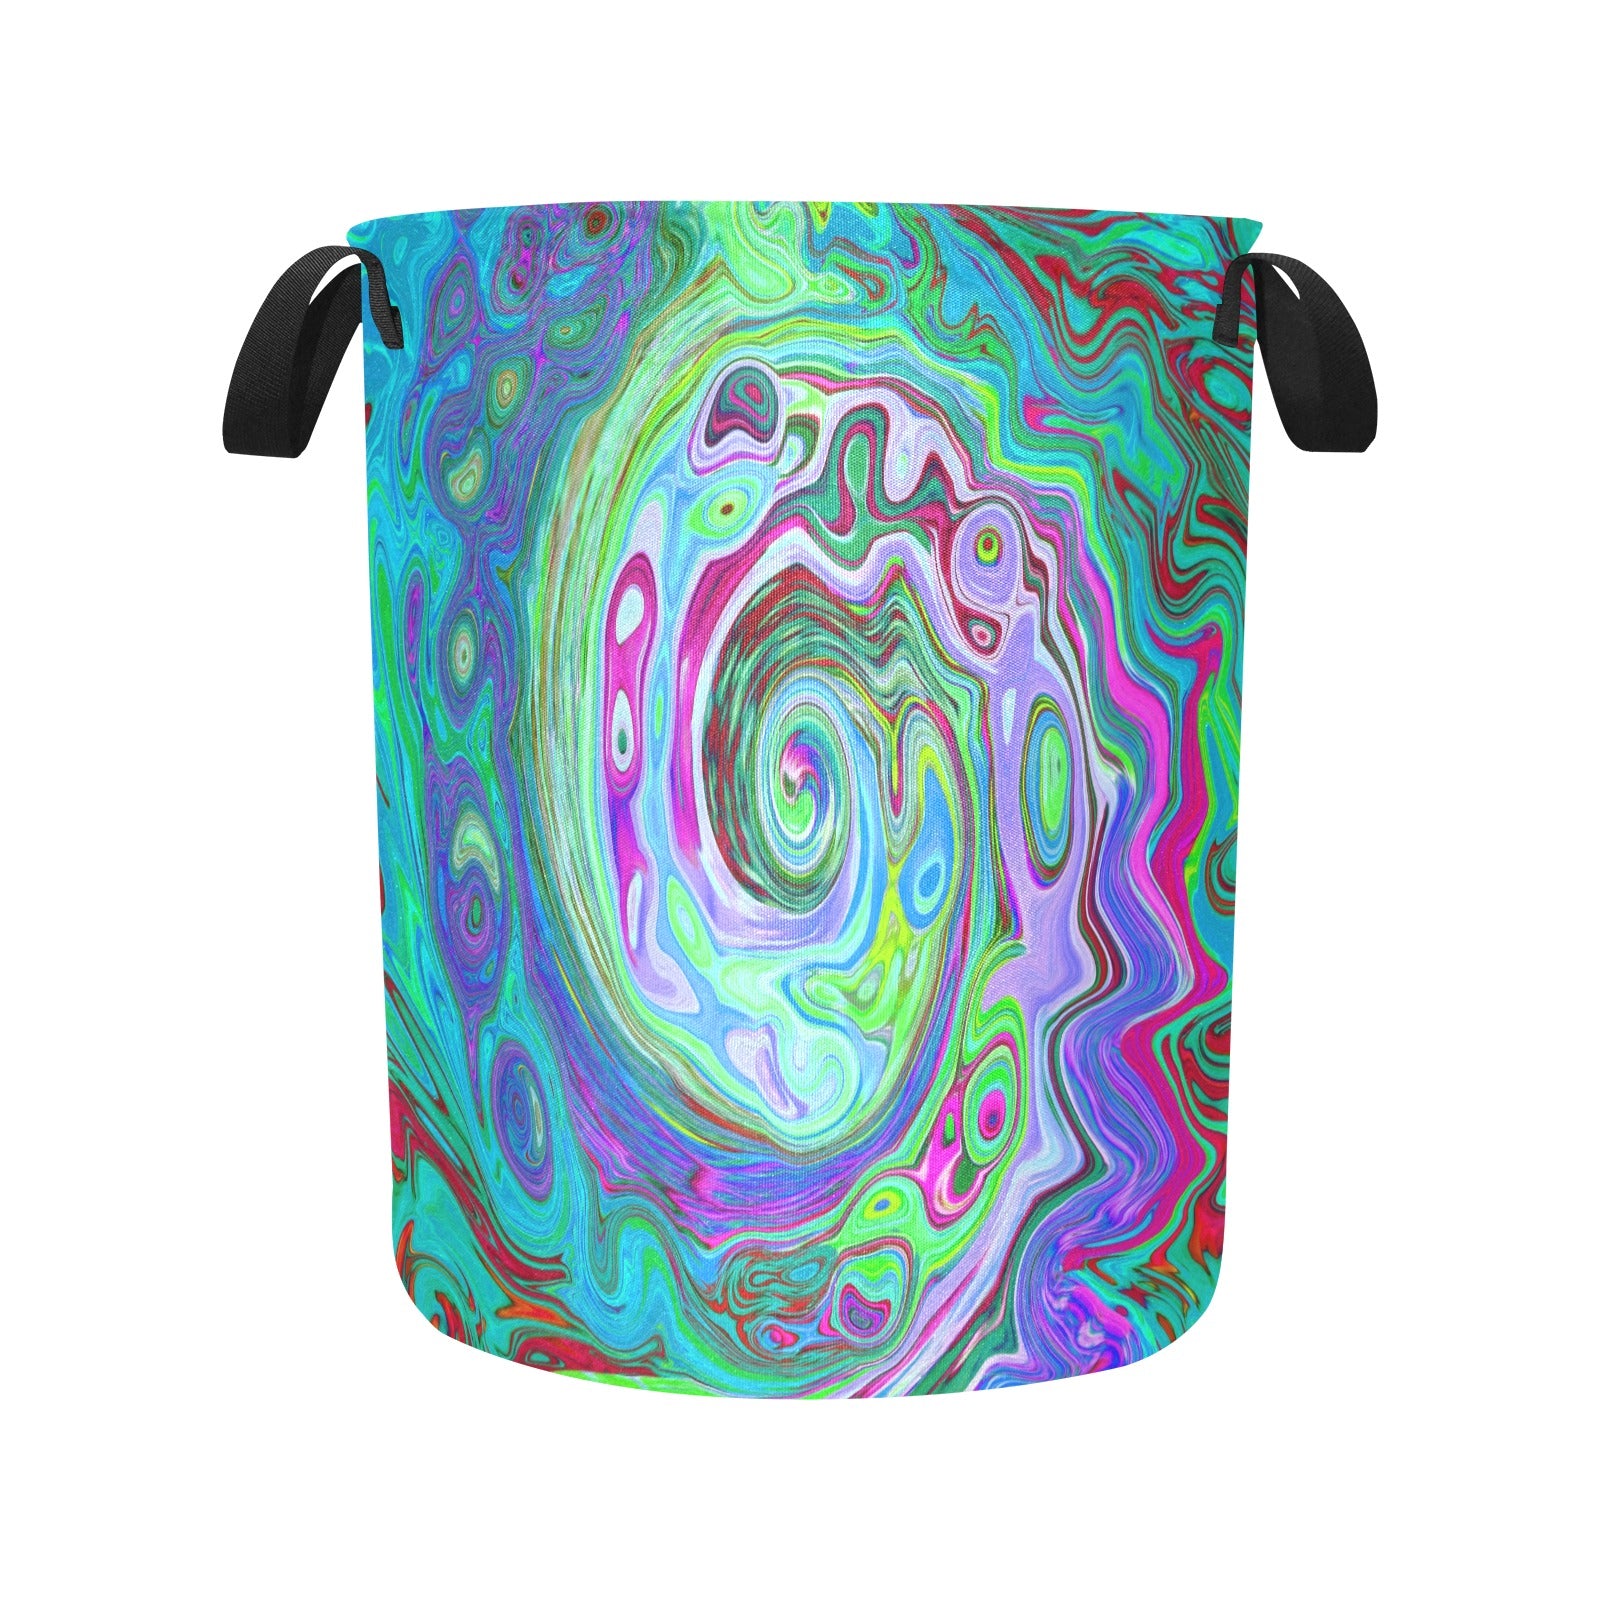 Fabric Laundry Basket with Handles, Retro Green, Red and Magenta Abstract Groovy Swirl